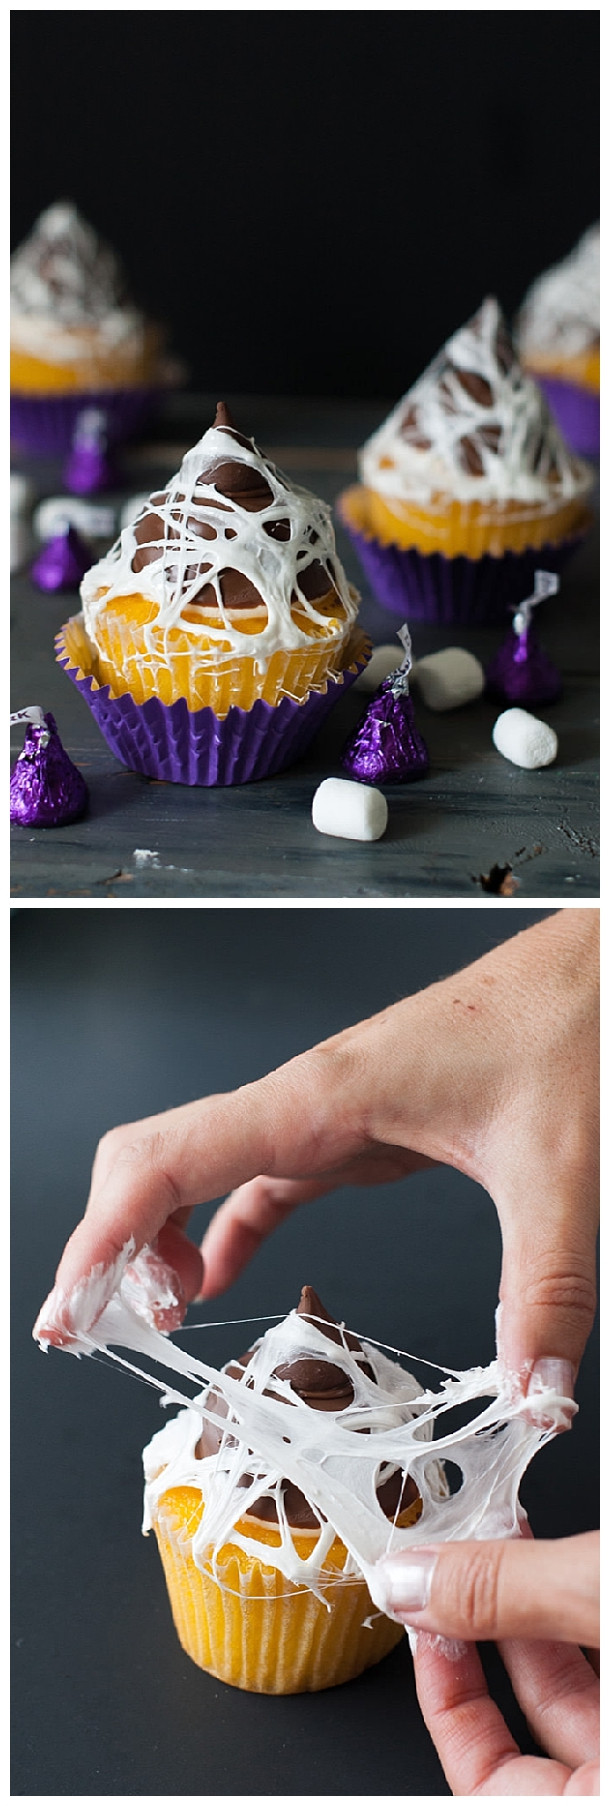 Halloween Party Desserts Ideas
 The BEST Halloween Party Recipes Spooktacular Desserts